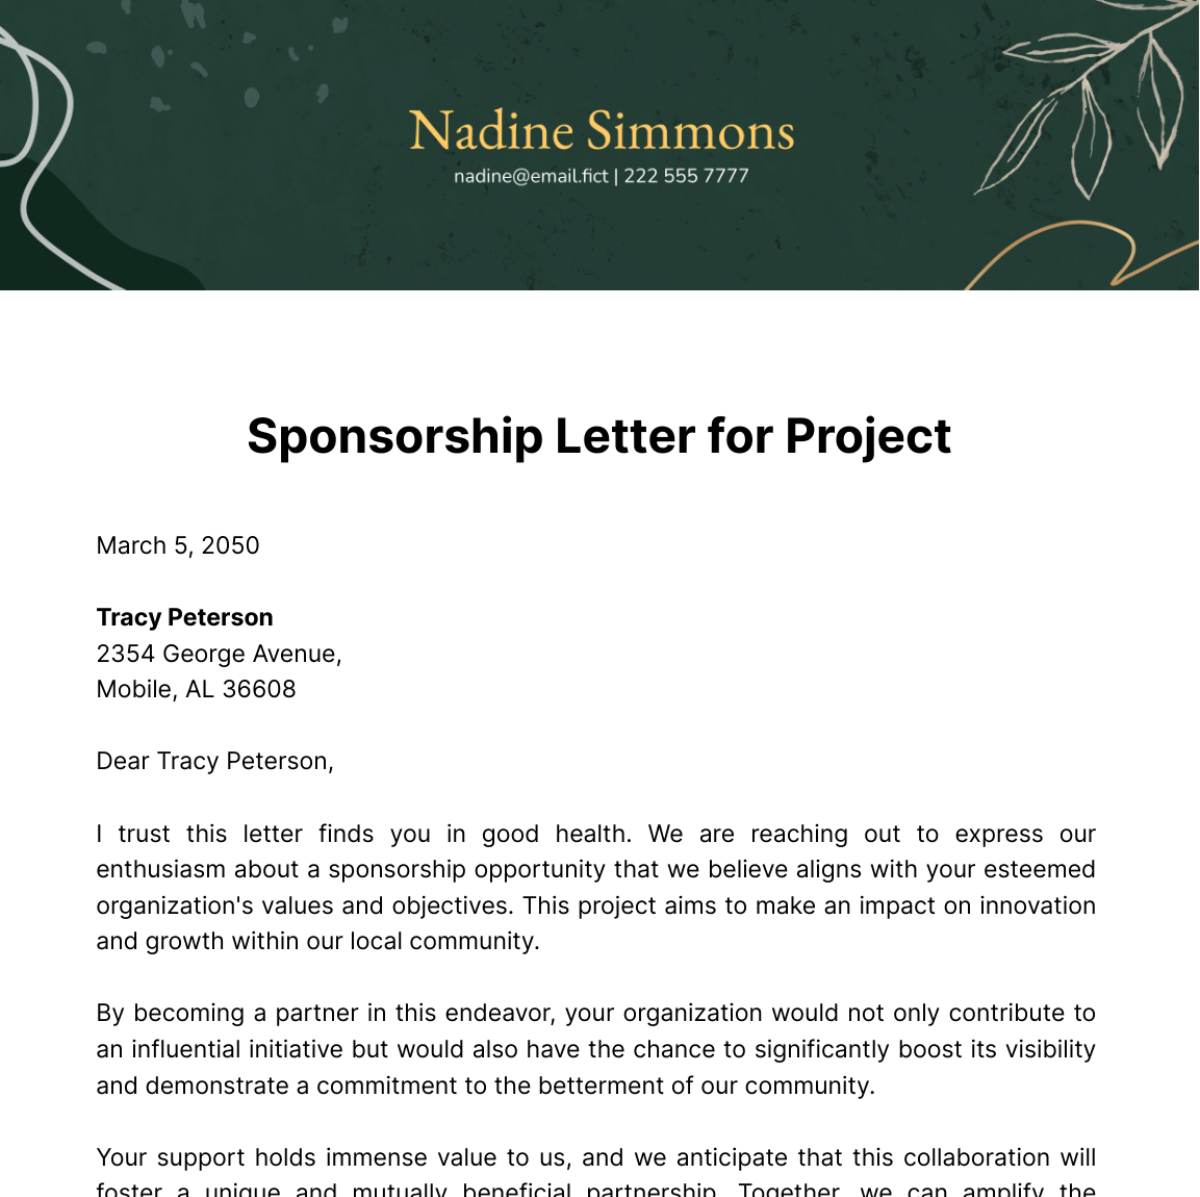 Sponsorship Letter for Project Template